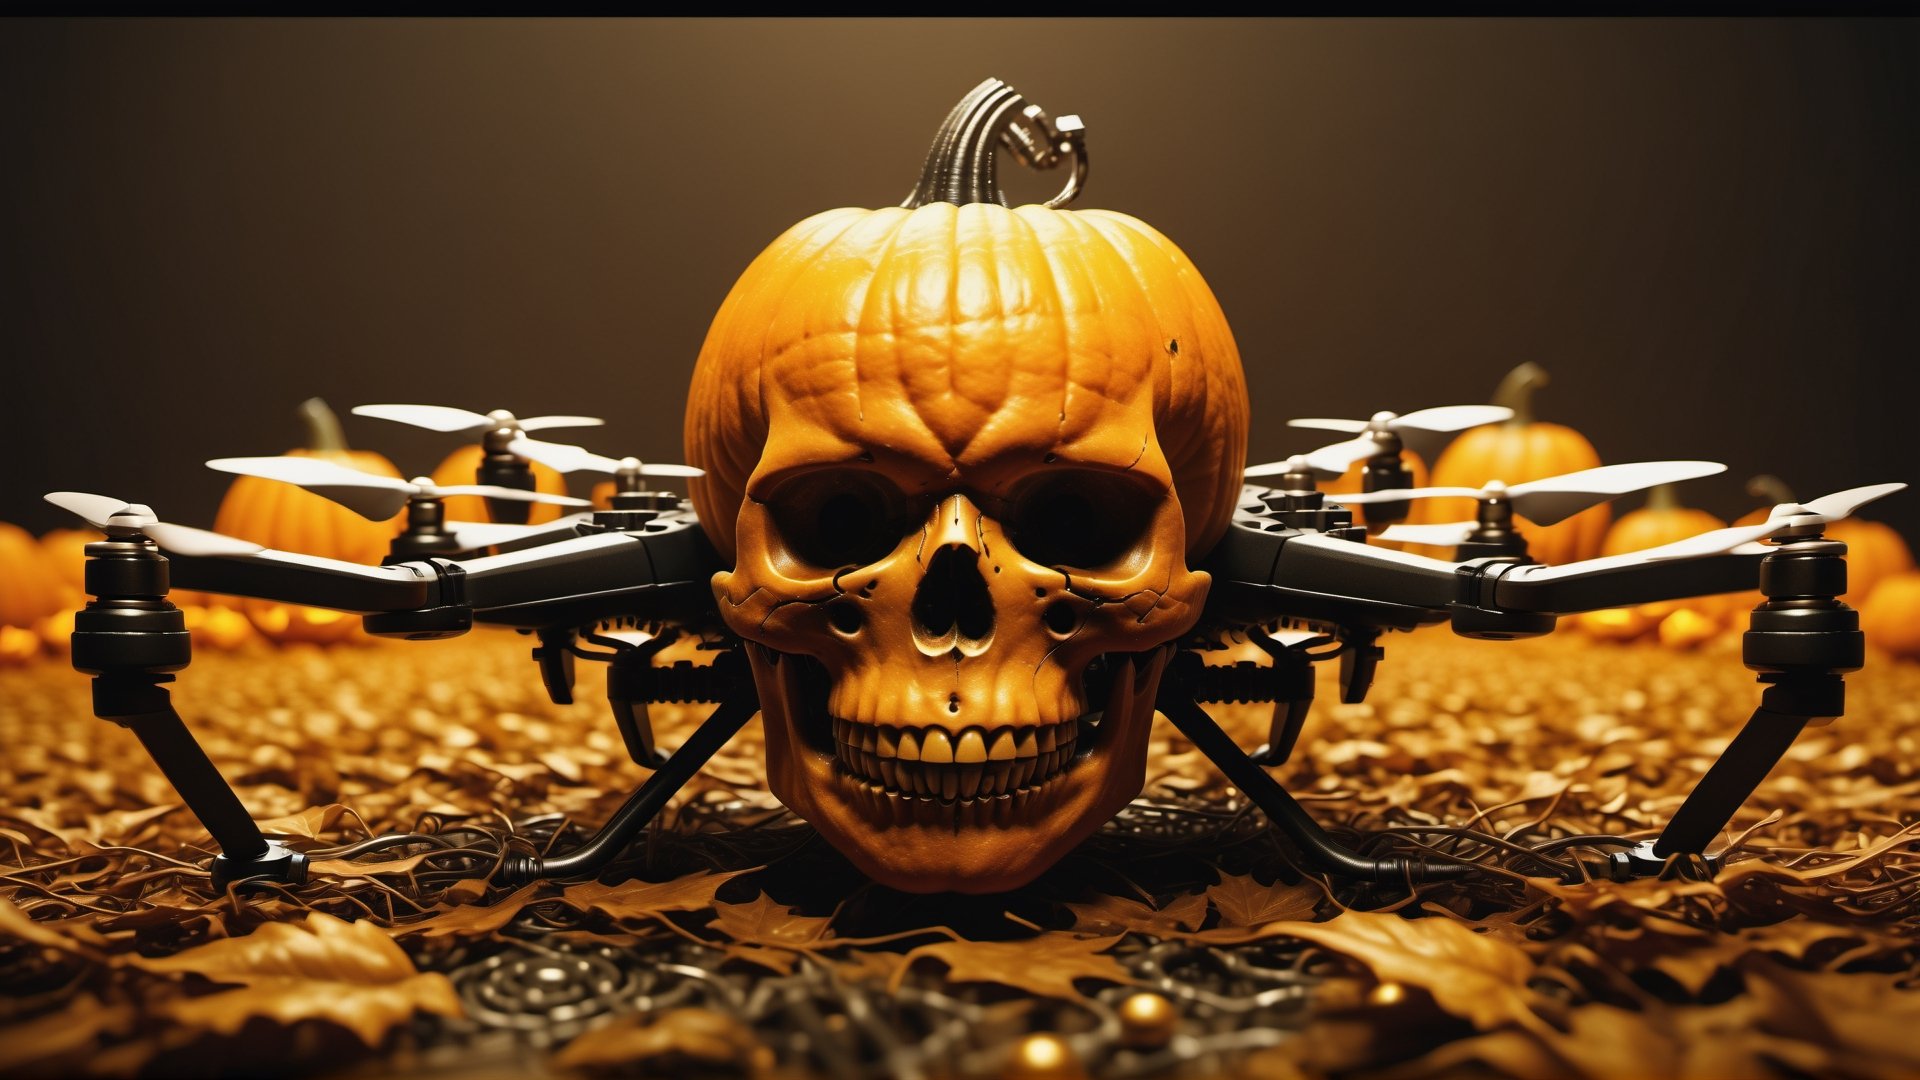 (best quality,  highres,  ultra high resolution,  masterpiece,  realistic,  extremely photograph,  detailed photo,  8K wallpaper,  intricate detail,  film grains), luxurious plastic drone in cyberpunk style, futuristic straight lines in orange black and gold plastics, luxurious with beautiful steampunk details, such as gears and capsules, themed with pumpkins and skulls in a terrifying Halloween atmosphere in autumn. This is a photographic scene designed with advanced photography, CGI, and VFX parameters, in high definition, ensuring flawless execution. high level of intricacy in the image.